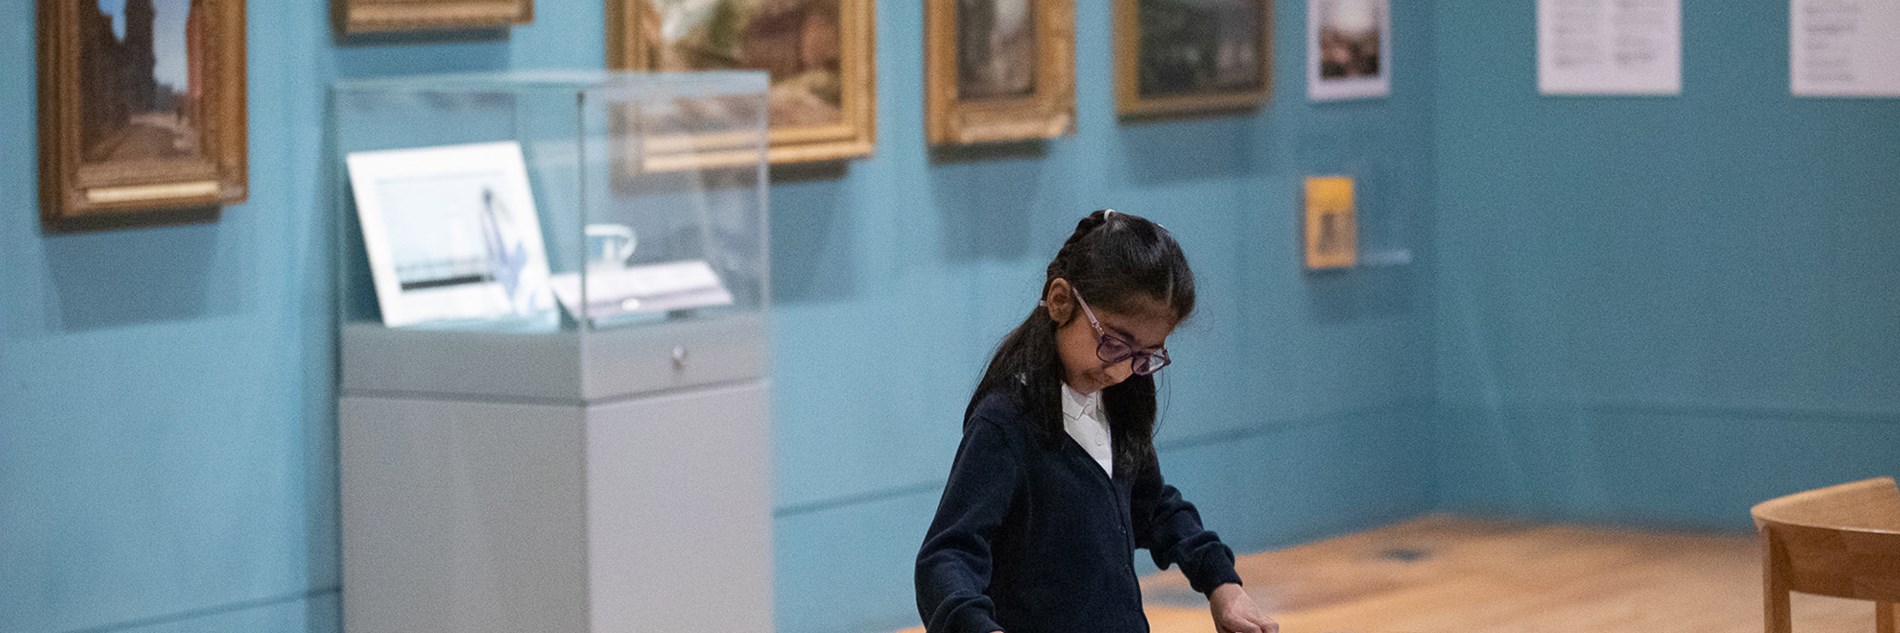 A primary school student leans over a table in a gallery with framed paintings on the walls. 